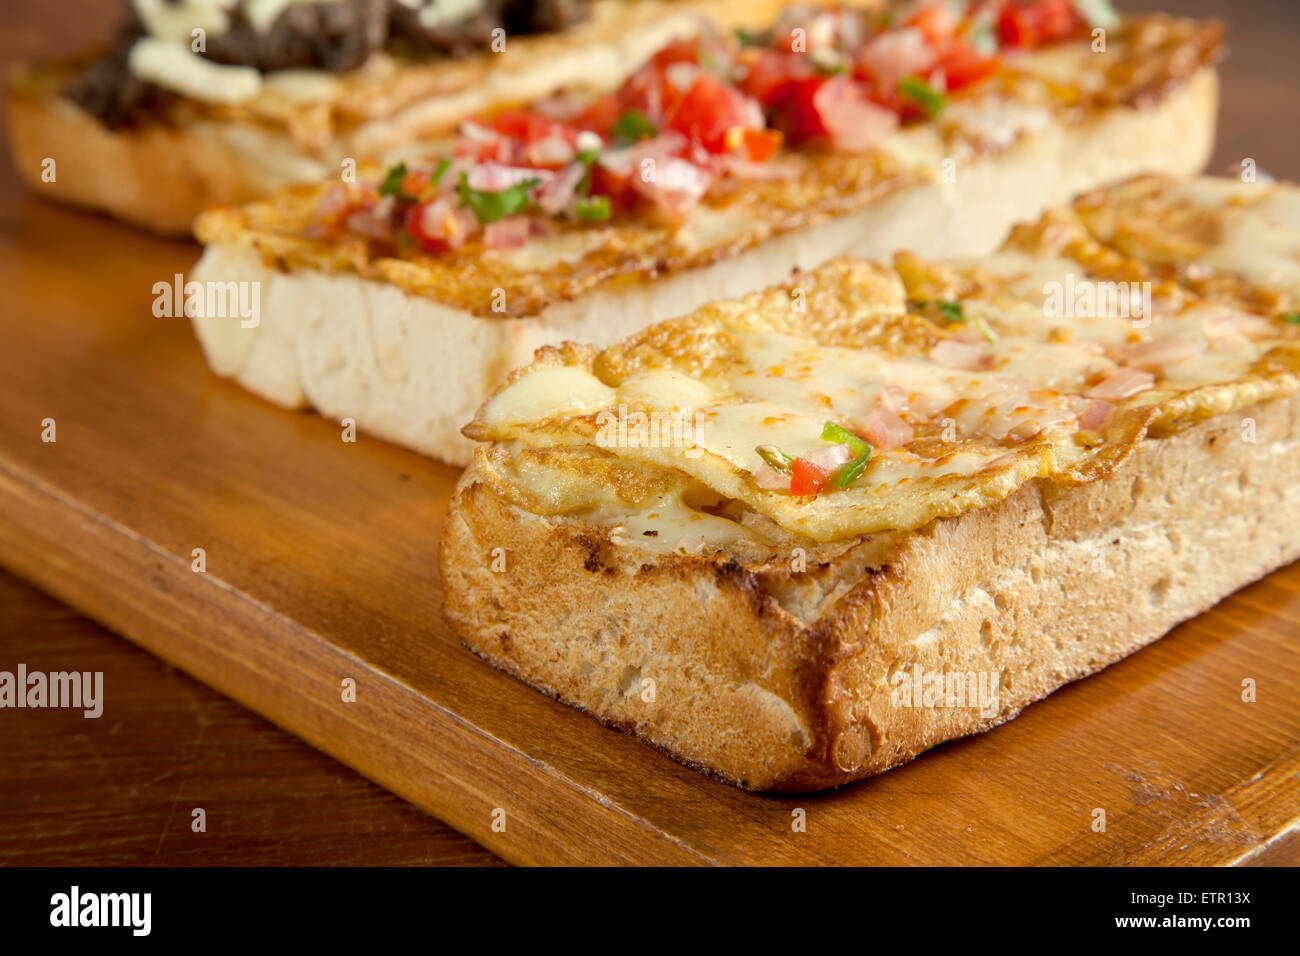 Toasted open faced omelette egg sandwich with melted mozzarella cheese close up Stock Photo